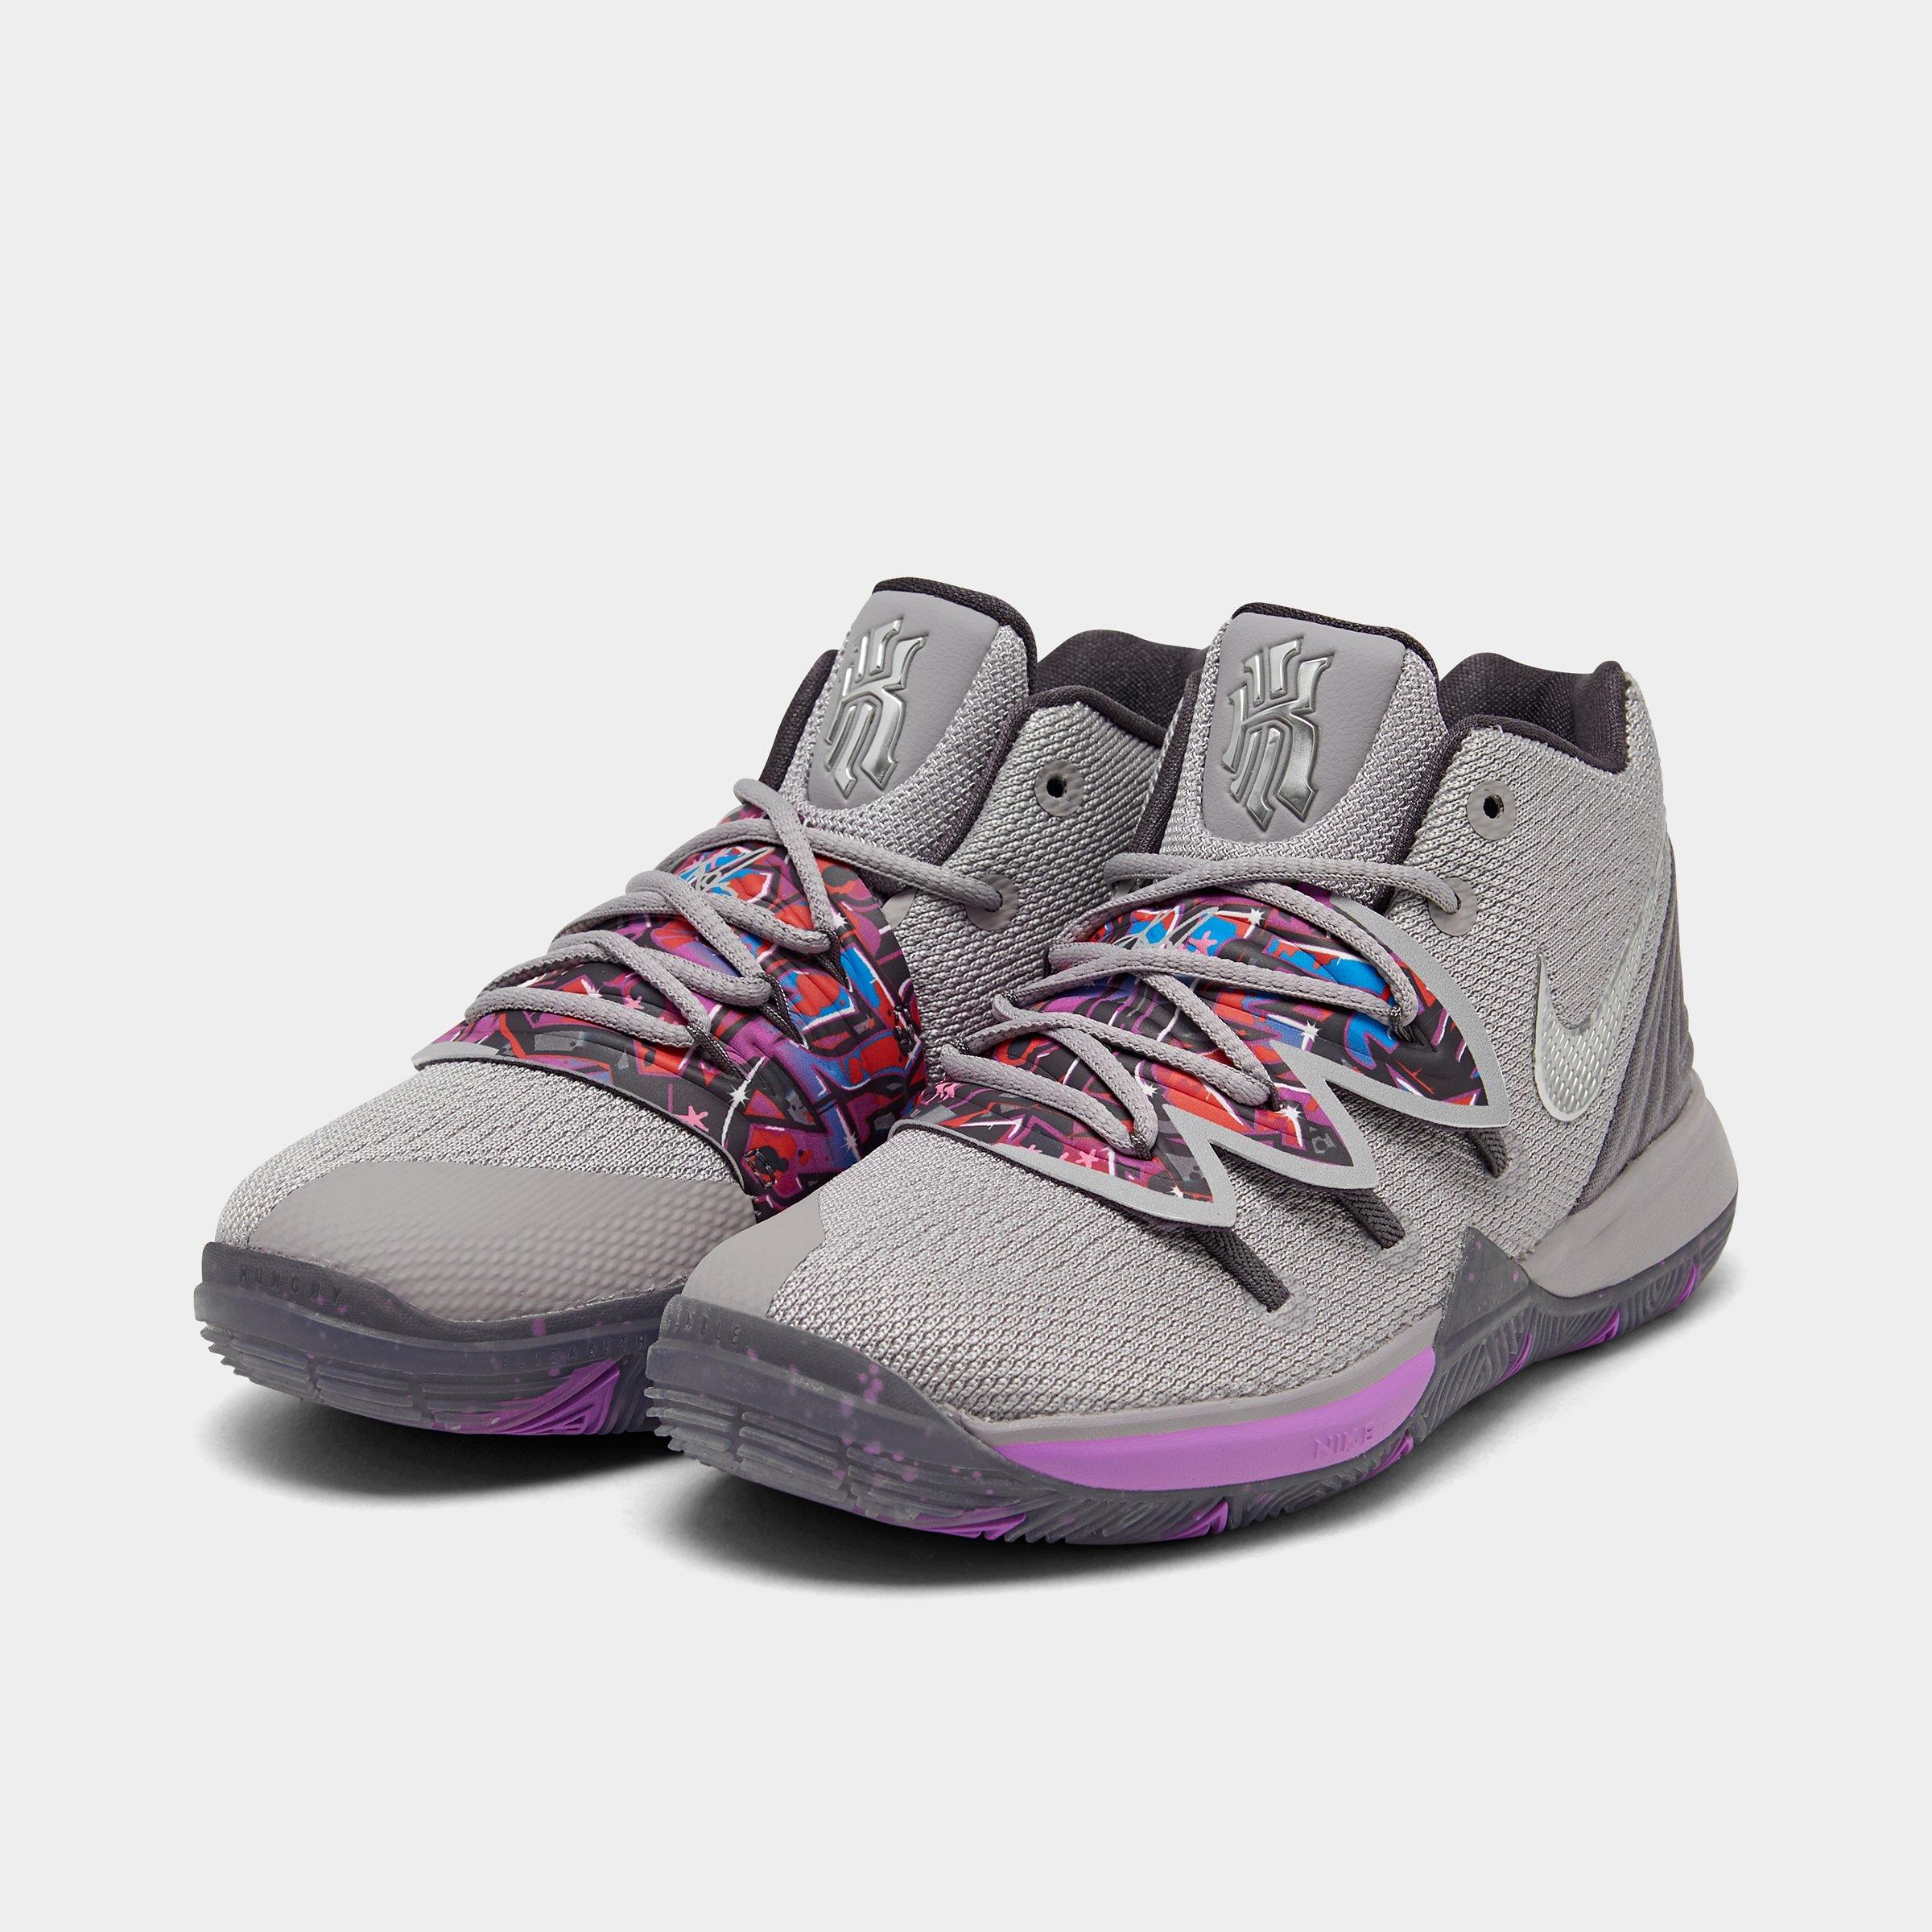 kyrie 5 for kids